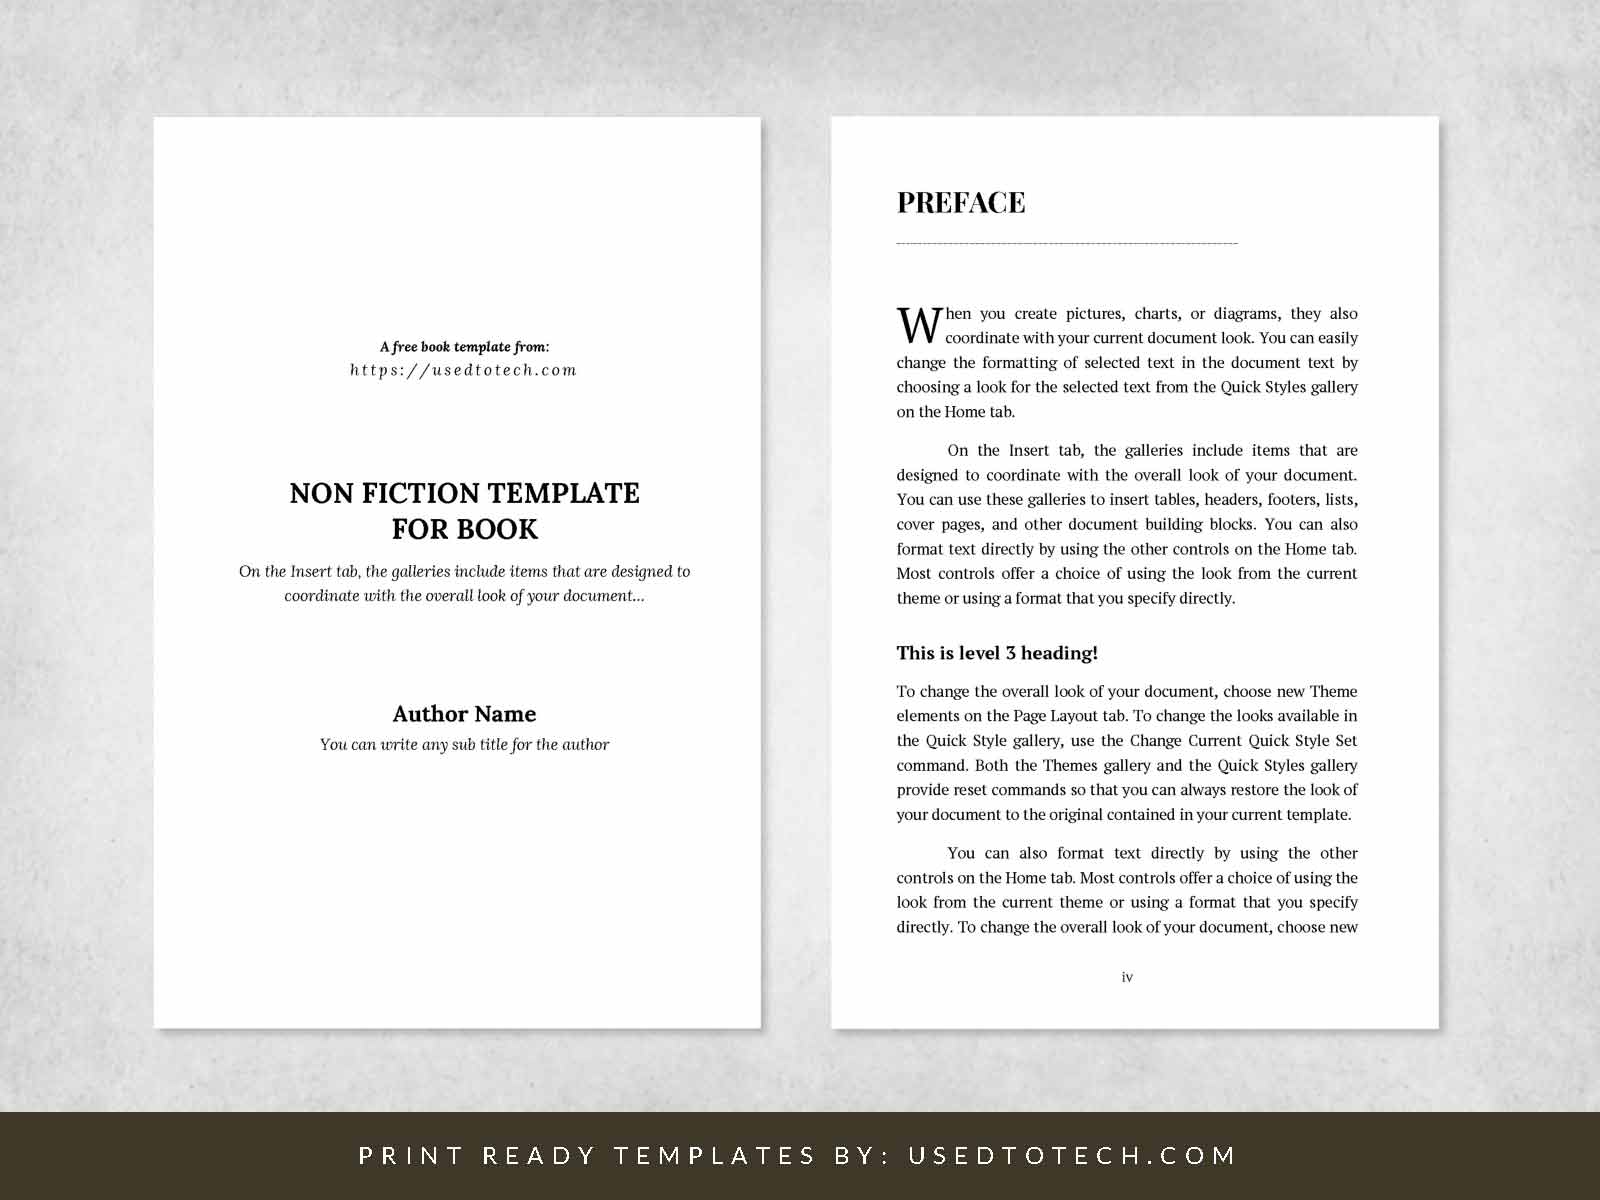 Non fiction template for book in 6 x 9